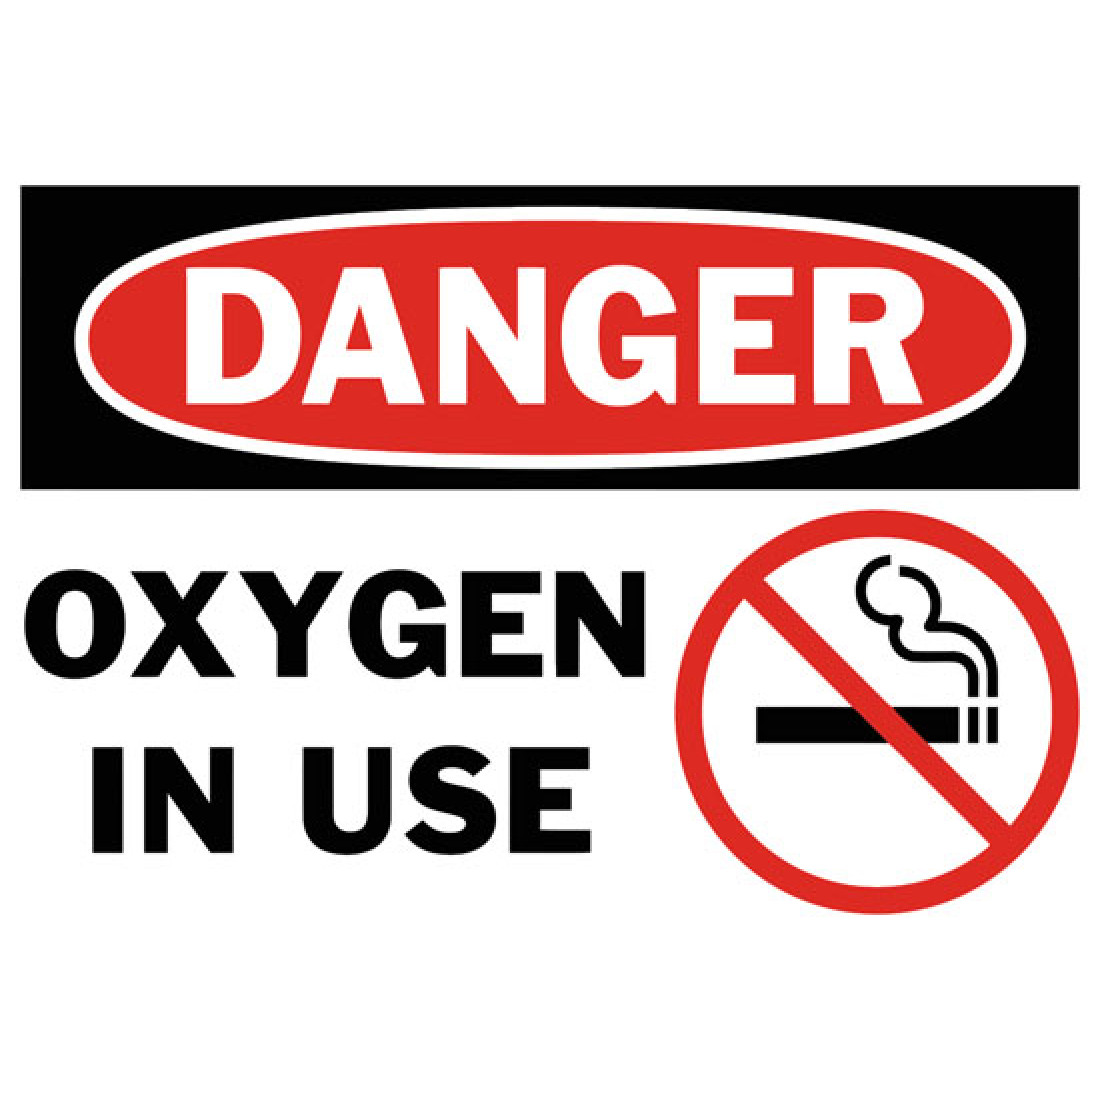 Oxygen In Use Sign Printable Free